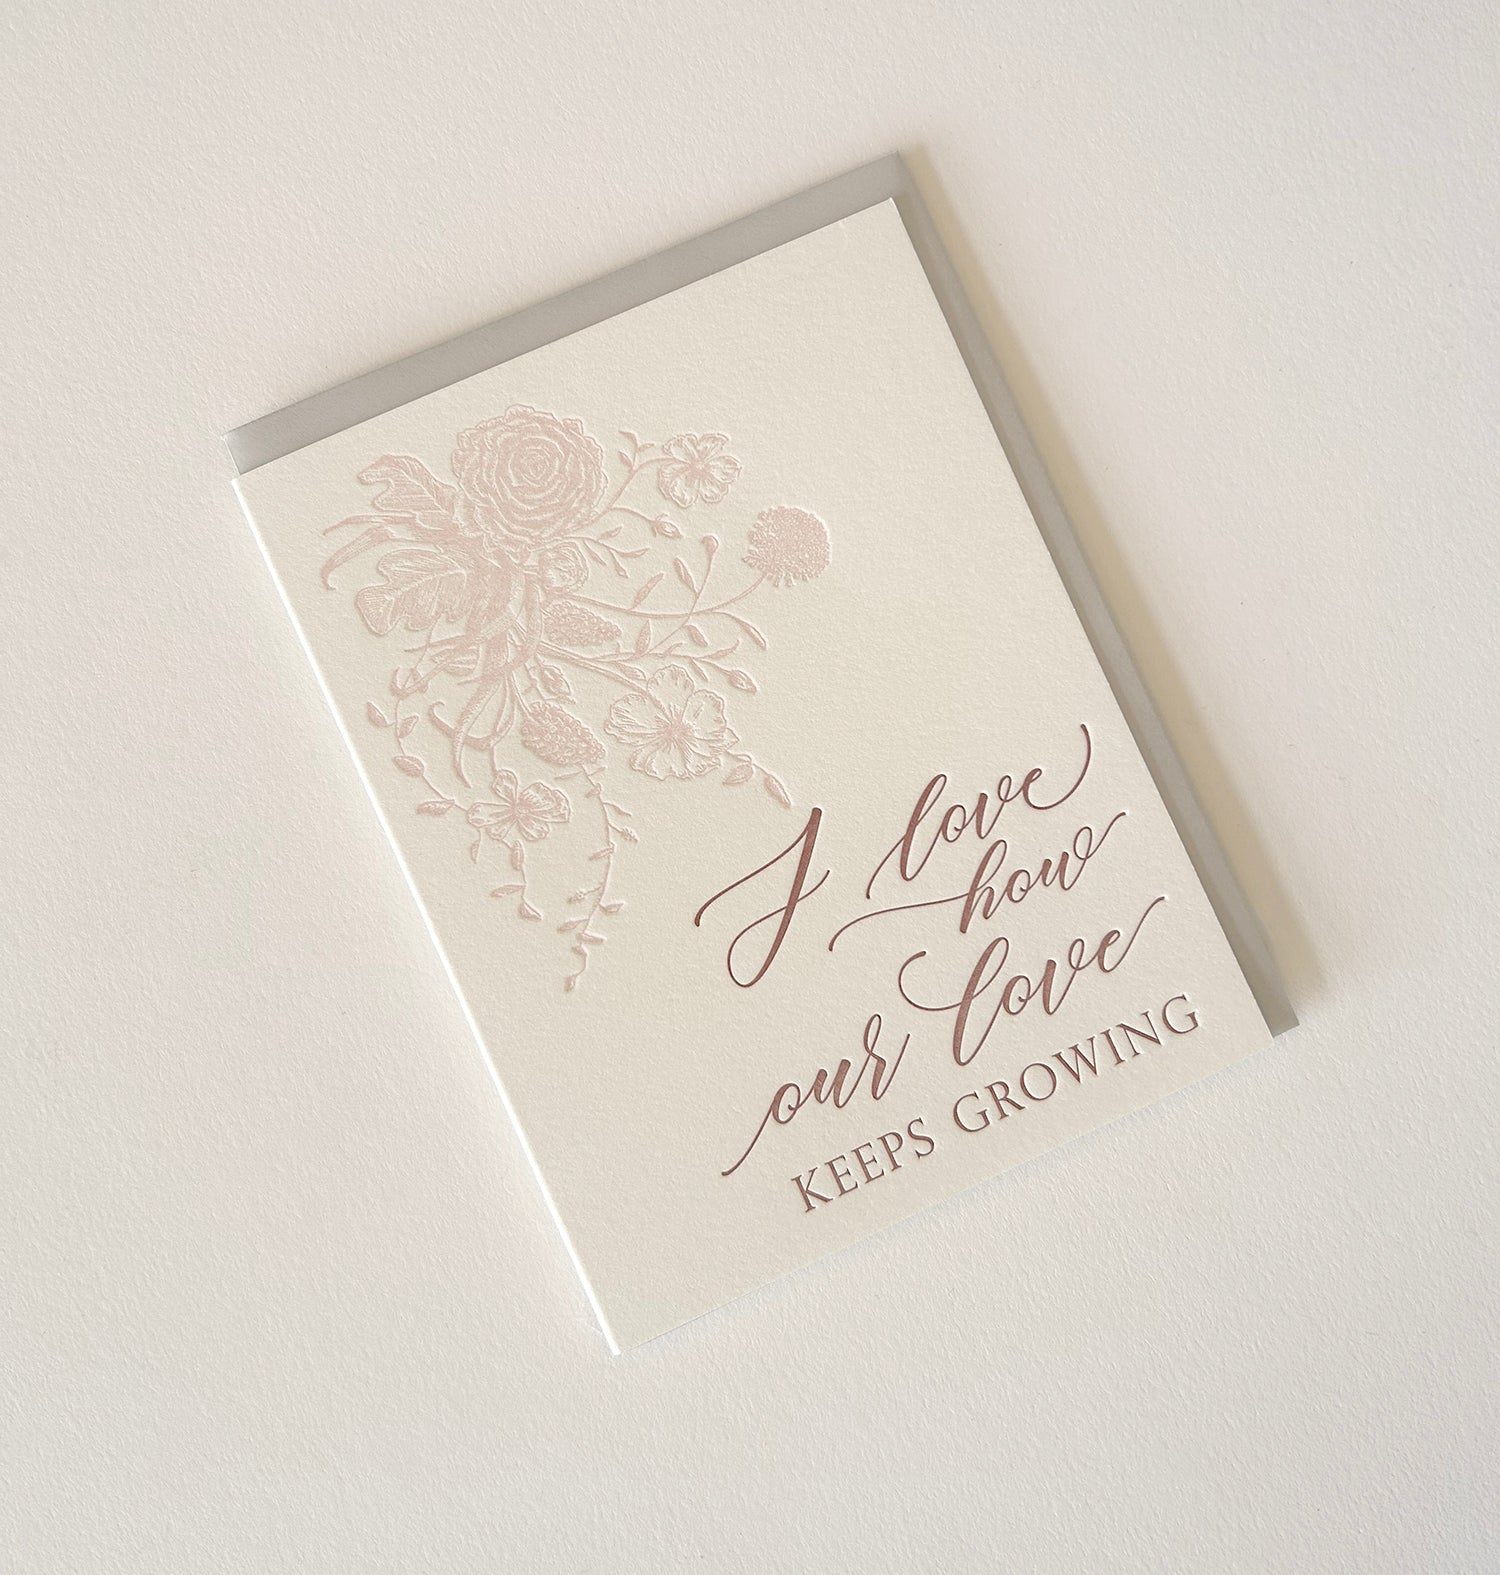 Letterpress love card with florals that says "I love how our love keeps growing" by Rust Belt Love